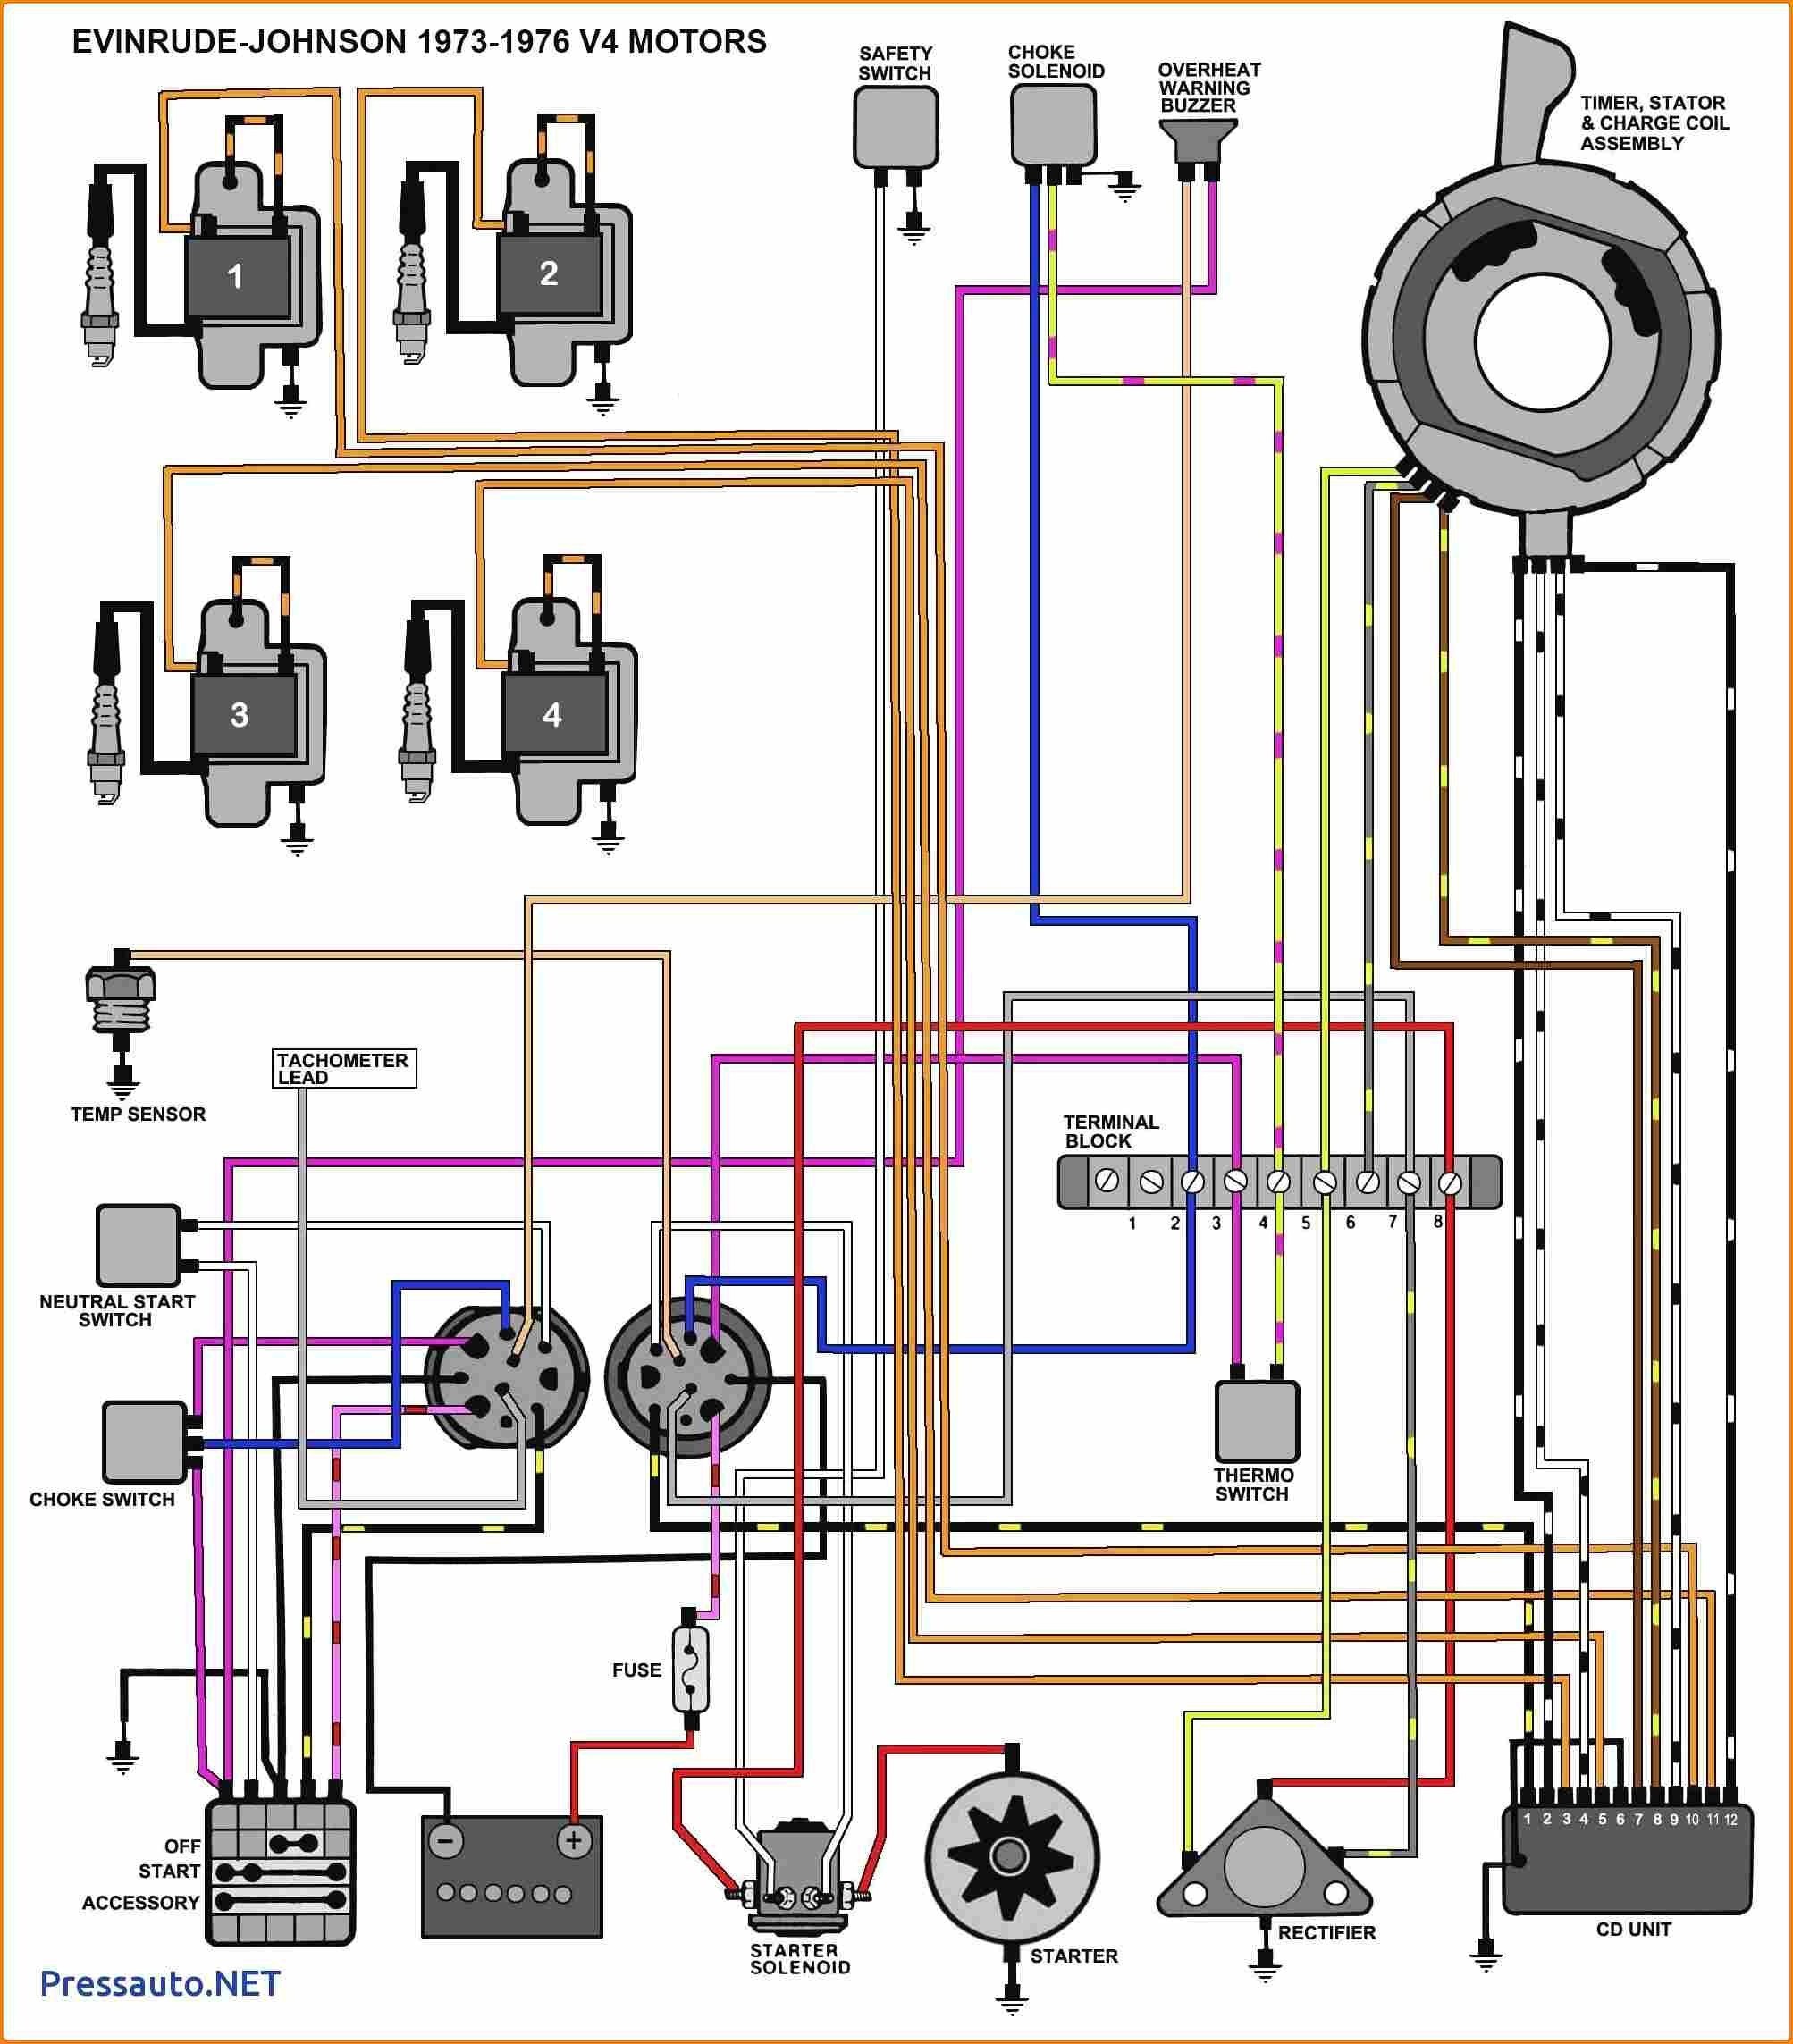 Wiring Diagram for Johnson Outboard Ignition Switch Best Omc Alternator Wiring Diagram Inspirationa 1970 Johnson Outboard